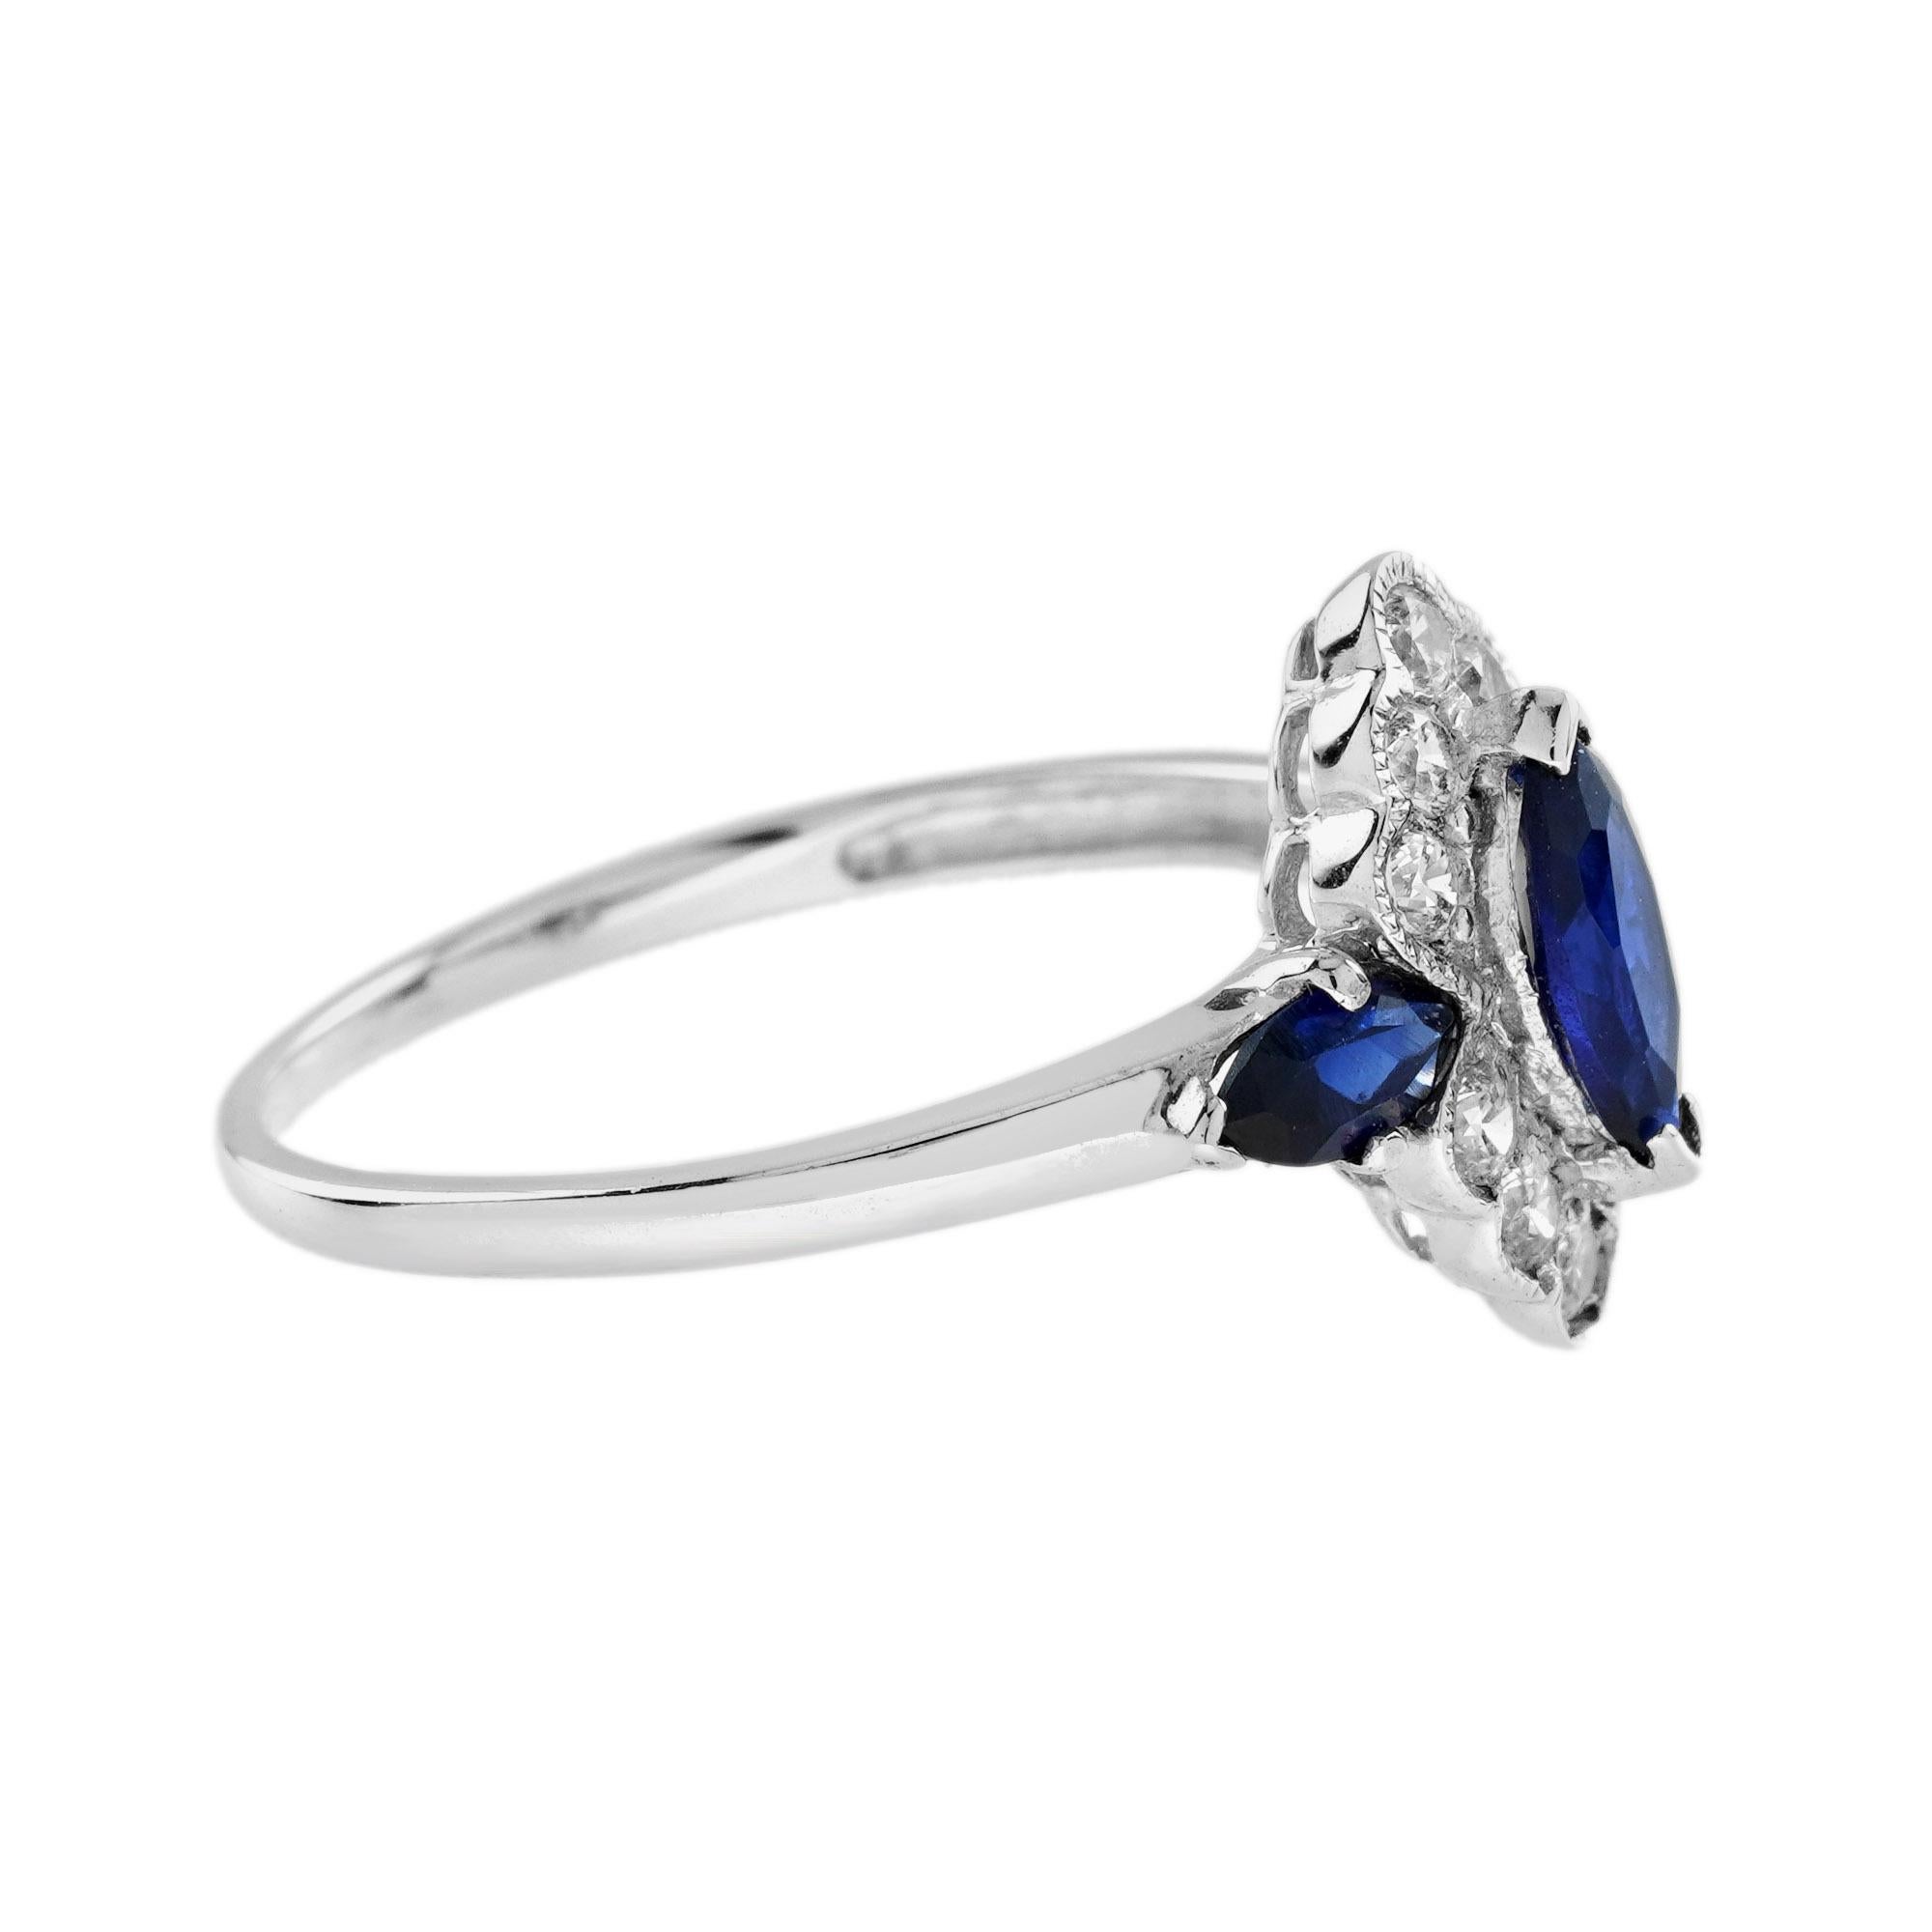 For Sale:  Marquise Blue Sapphire and Diamond Halo Ring in 14K White Gold 4